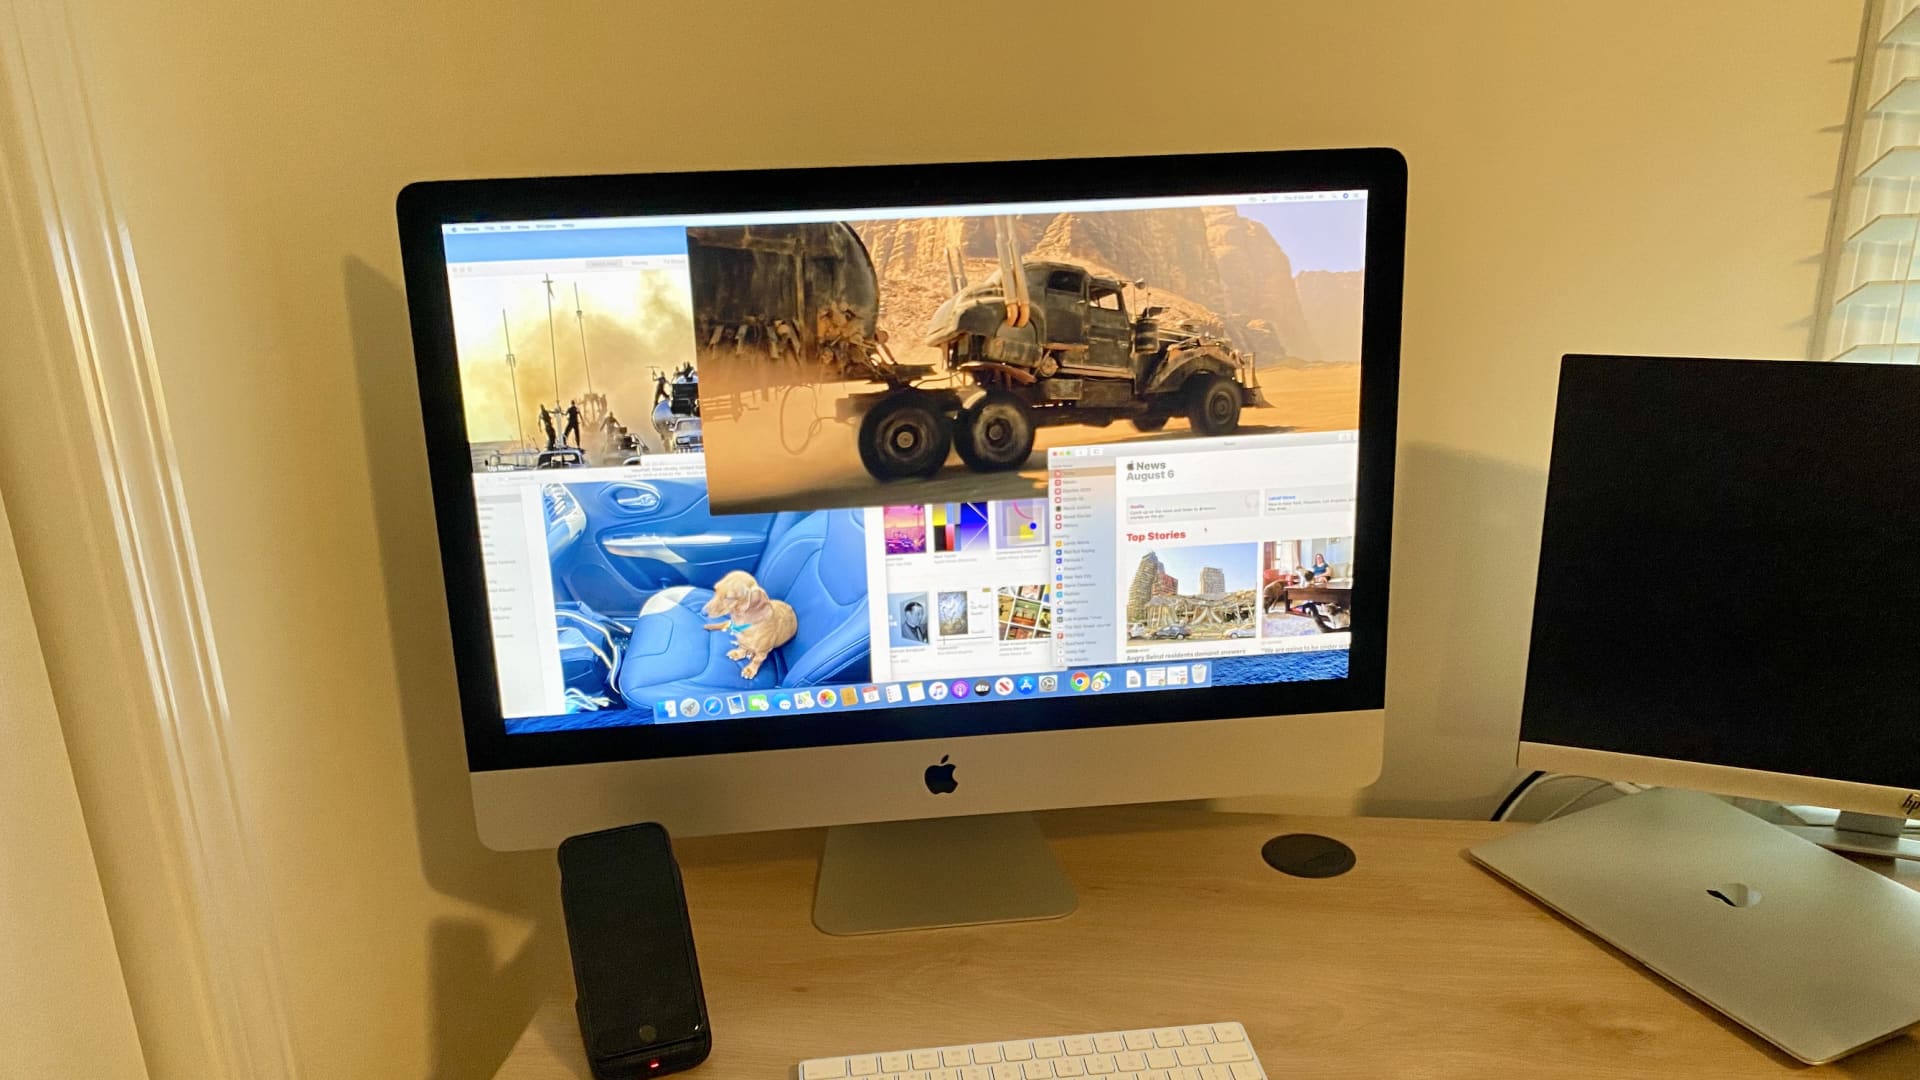 The new 27-inch iMac is awesome and has everything you need if you're working from home